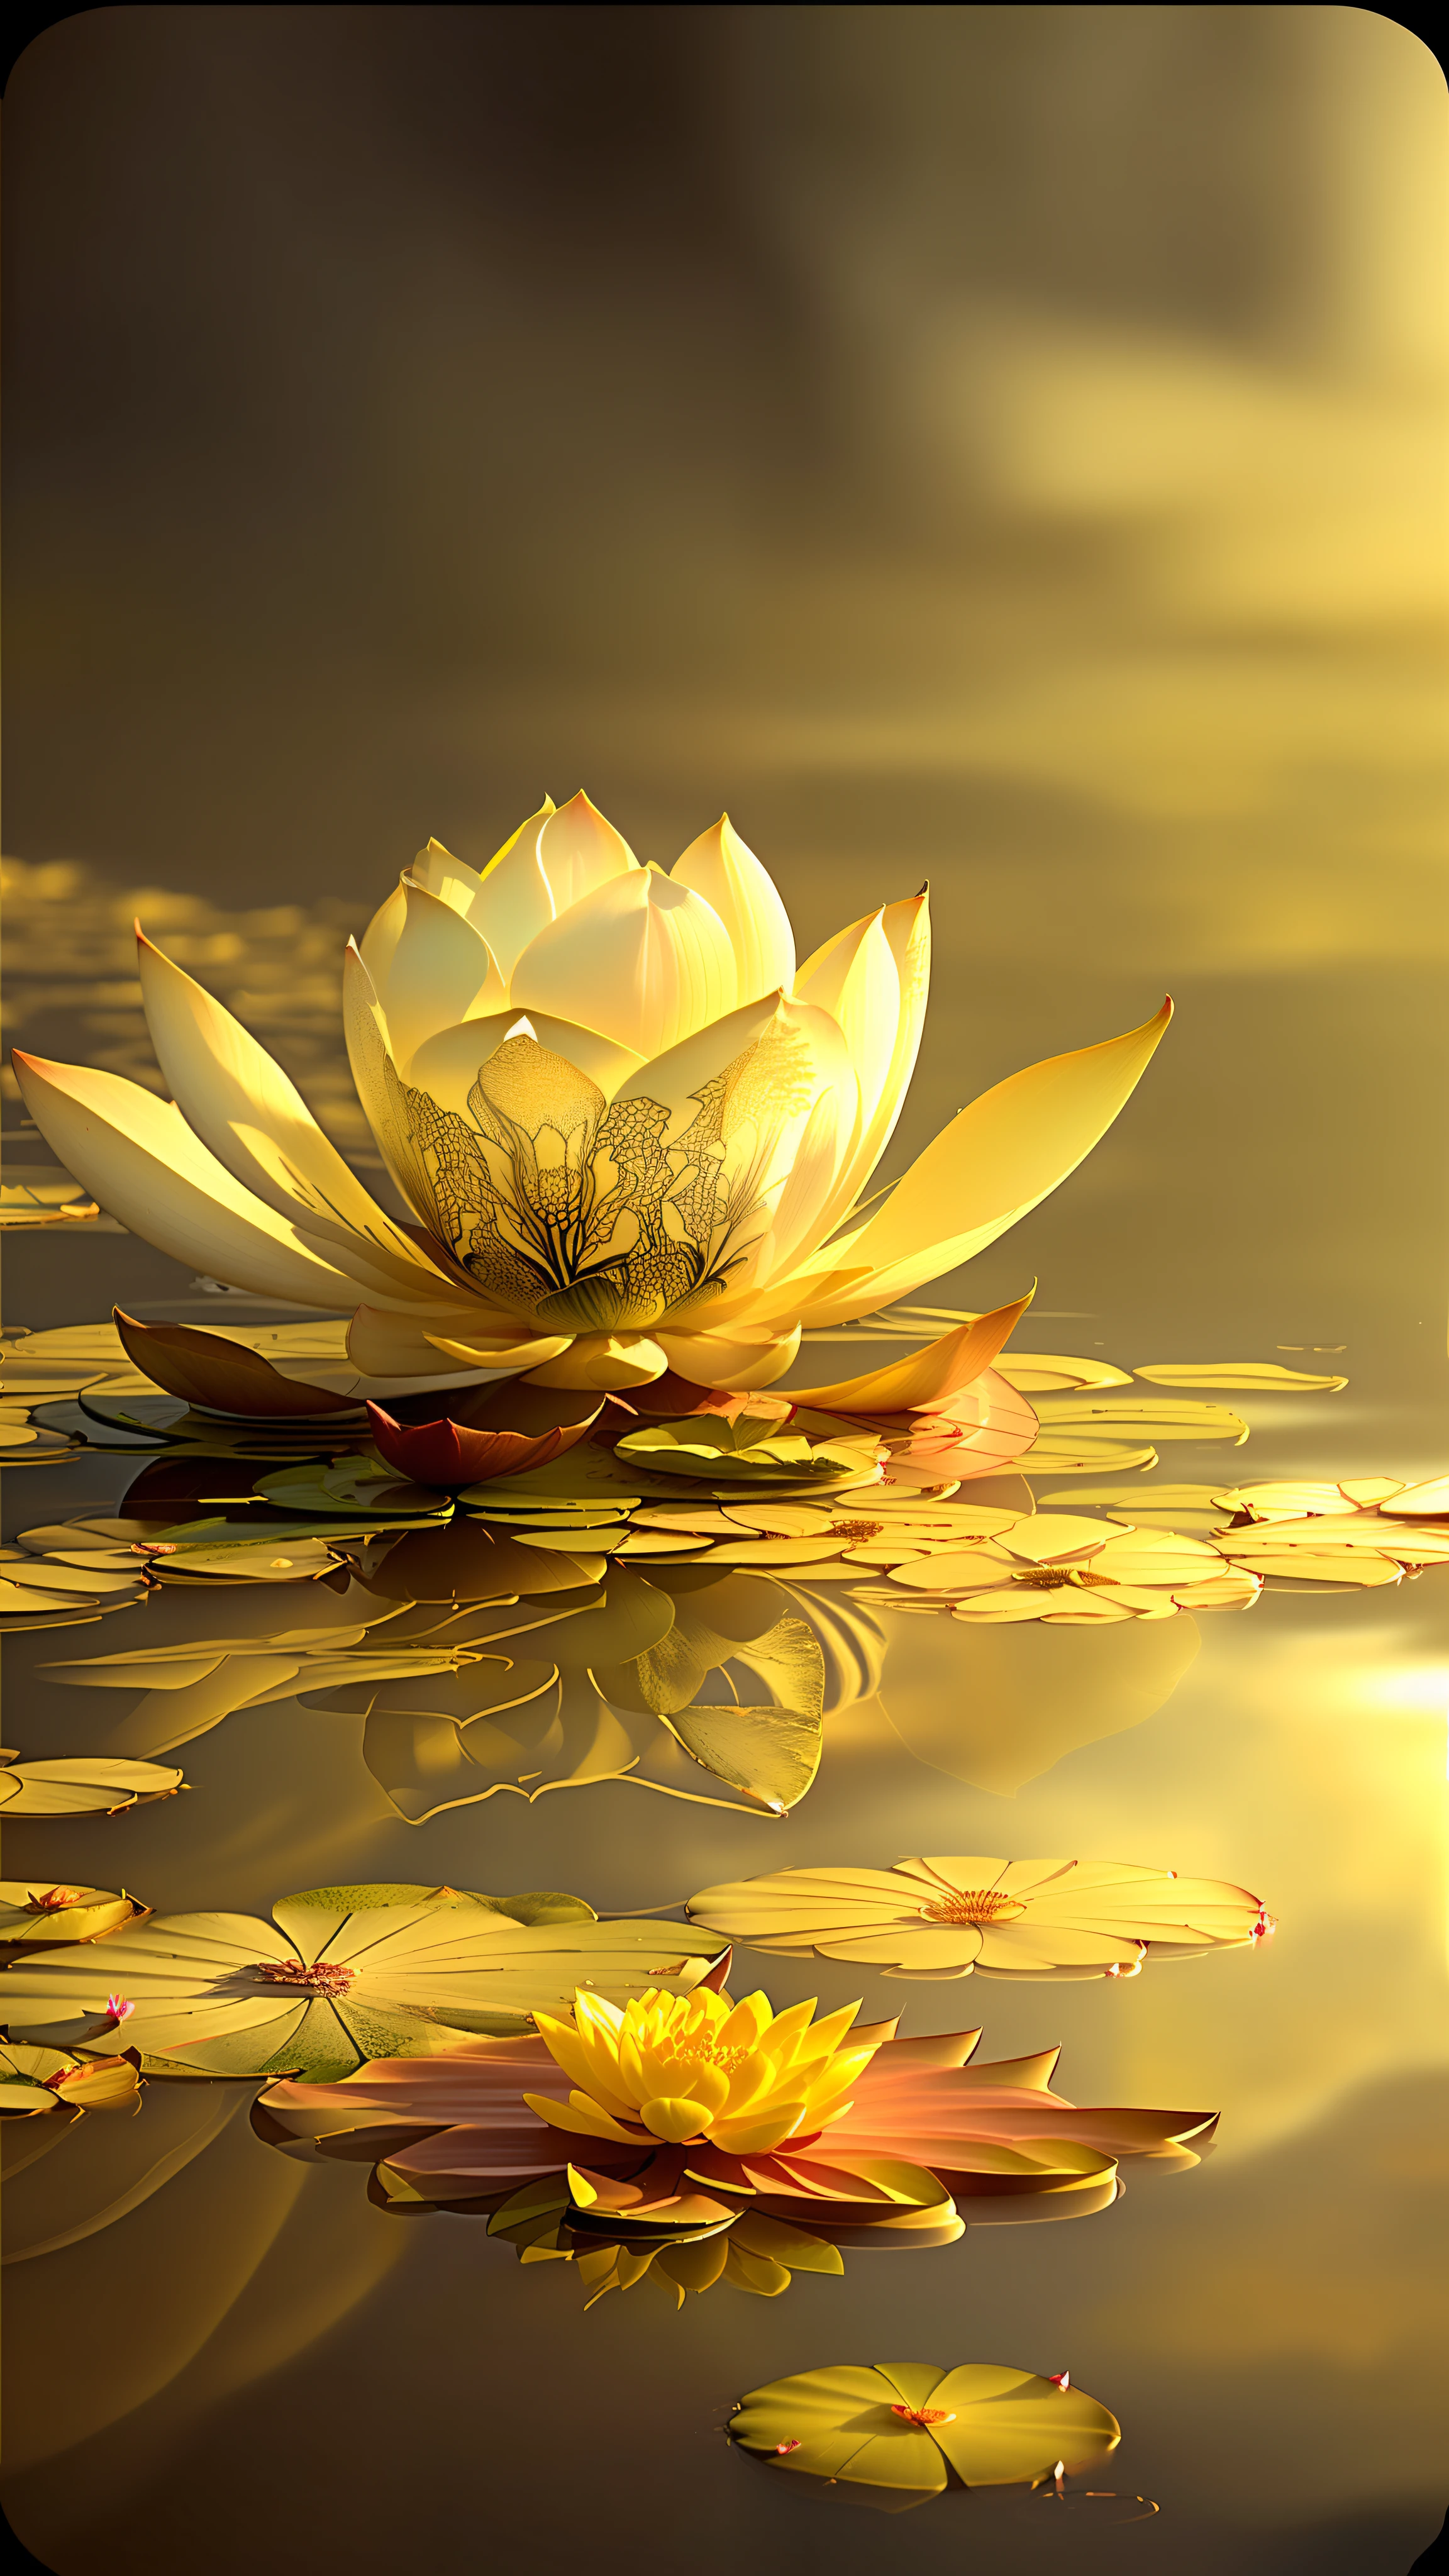 there is a white flower that is floating in the water, lotus, lotus flower, sitting on a lotus flower, reflecting flower, lotus flowers, lotus pond, standing gracefully on a lotus, with lotus flowers, lotus flowers in the water, floating in a powerful zen state, lotus petals, golden lotus princess, beautiful image,  by Han Gan, lotus, wealth, Golden